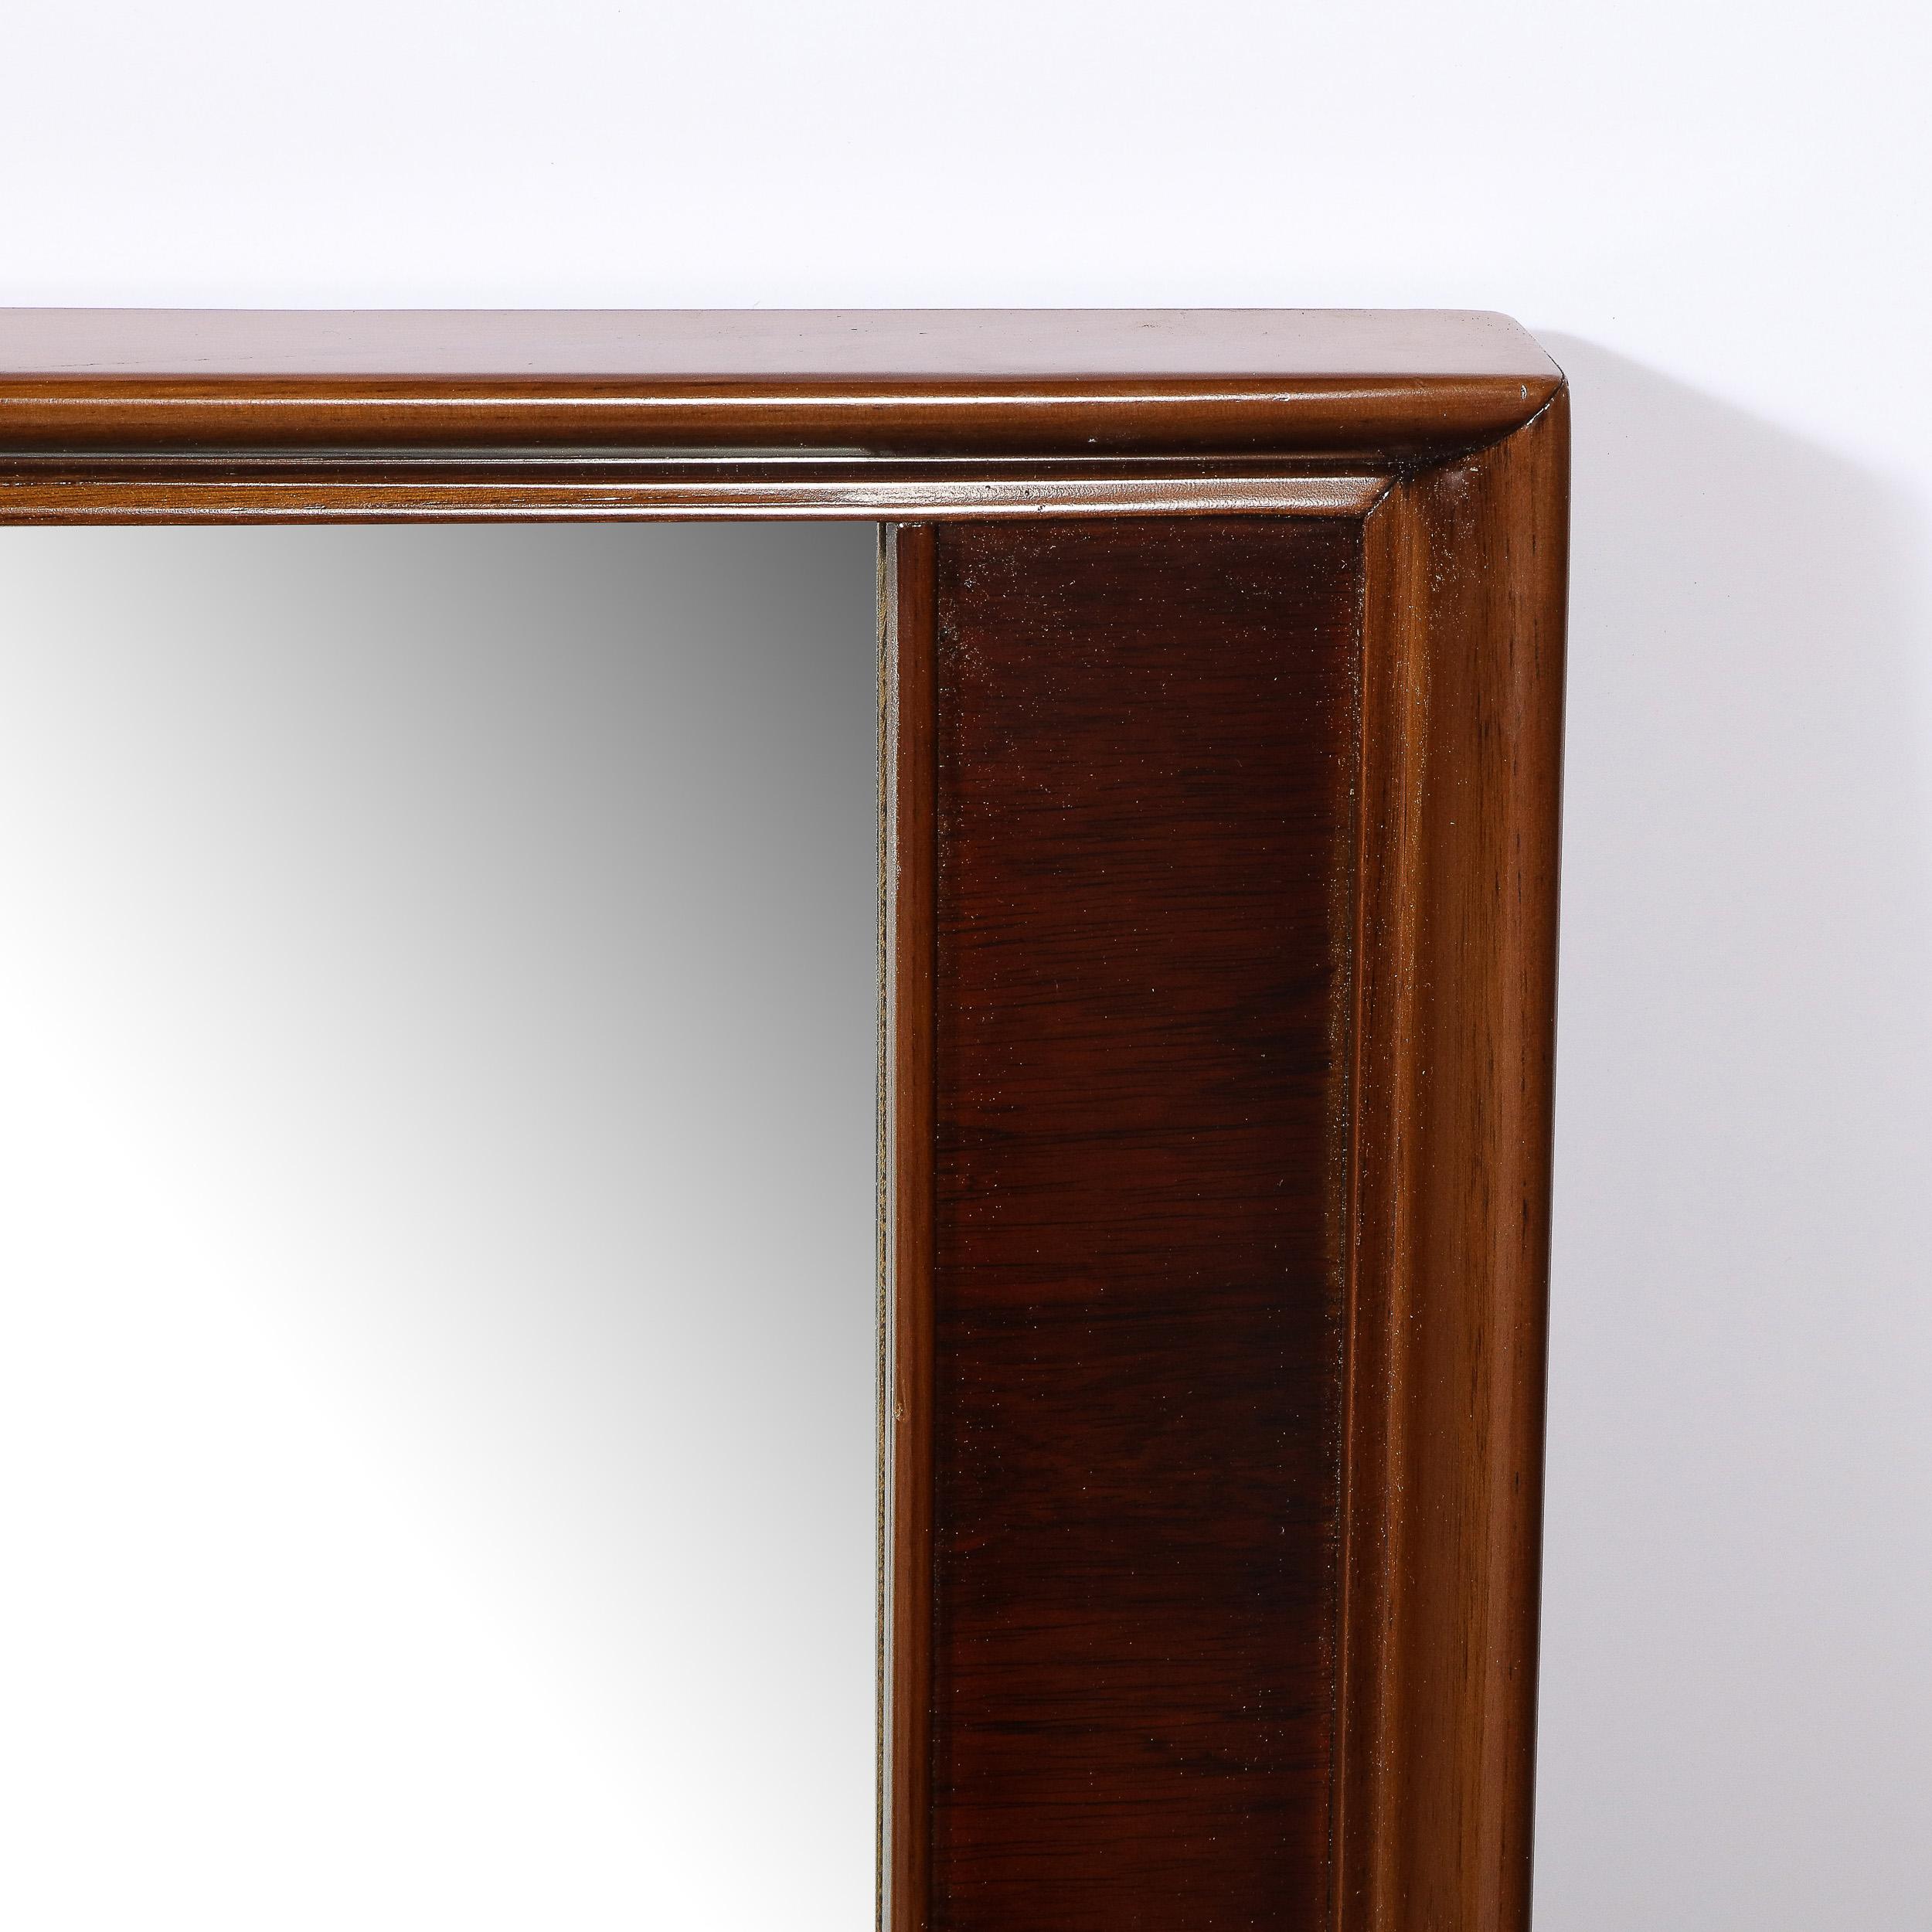 This elegant and understated Mid-Century Modern mirror was realized in the United States circa 1960. It features a prominent border in hand rubbed walnut framing a plain mirror center. This mirror is a study in the economy and elegant efficiency